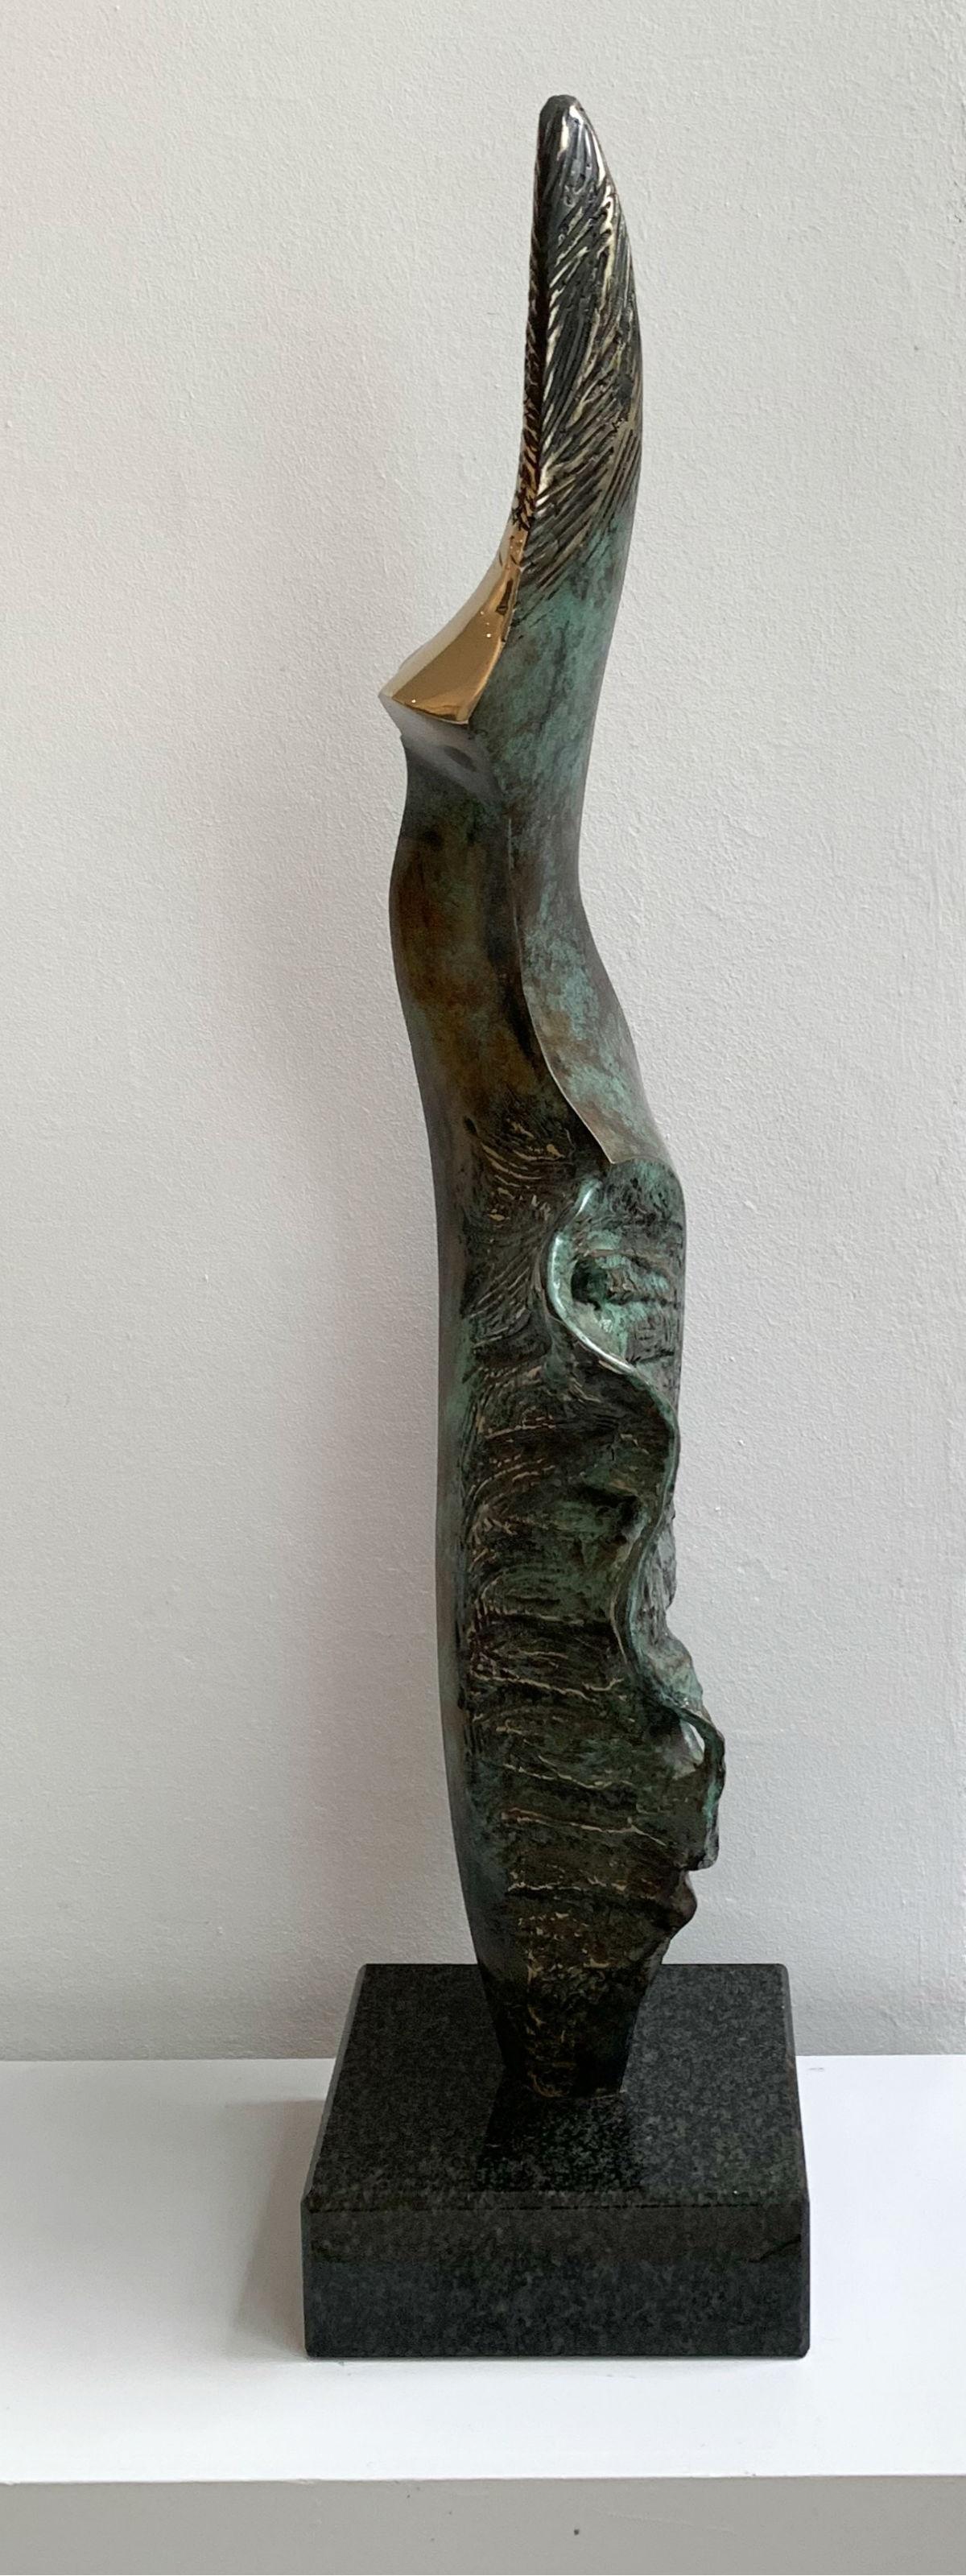 Copy 3 of 8
Dimesnions of sculpture including base

STANISŁAW  WYSOCKI (b. 1949)
Wysocki studied at the Academy of Fine Arts in Poznań (1978-1980) and then at the Hochschule der Kunste in Berlin under prof. J.H. Lonas. He received his diploma in